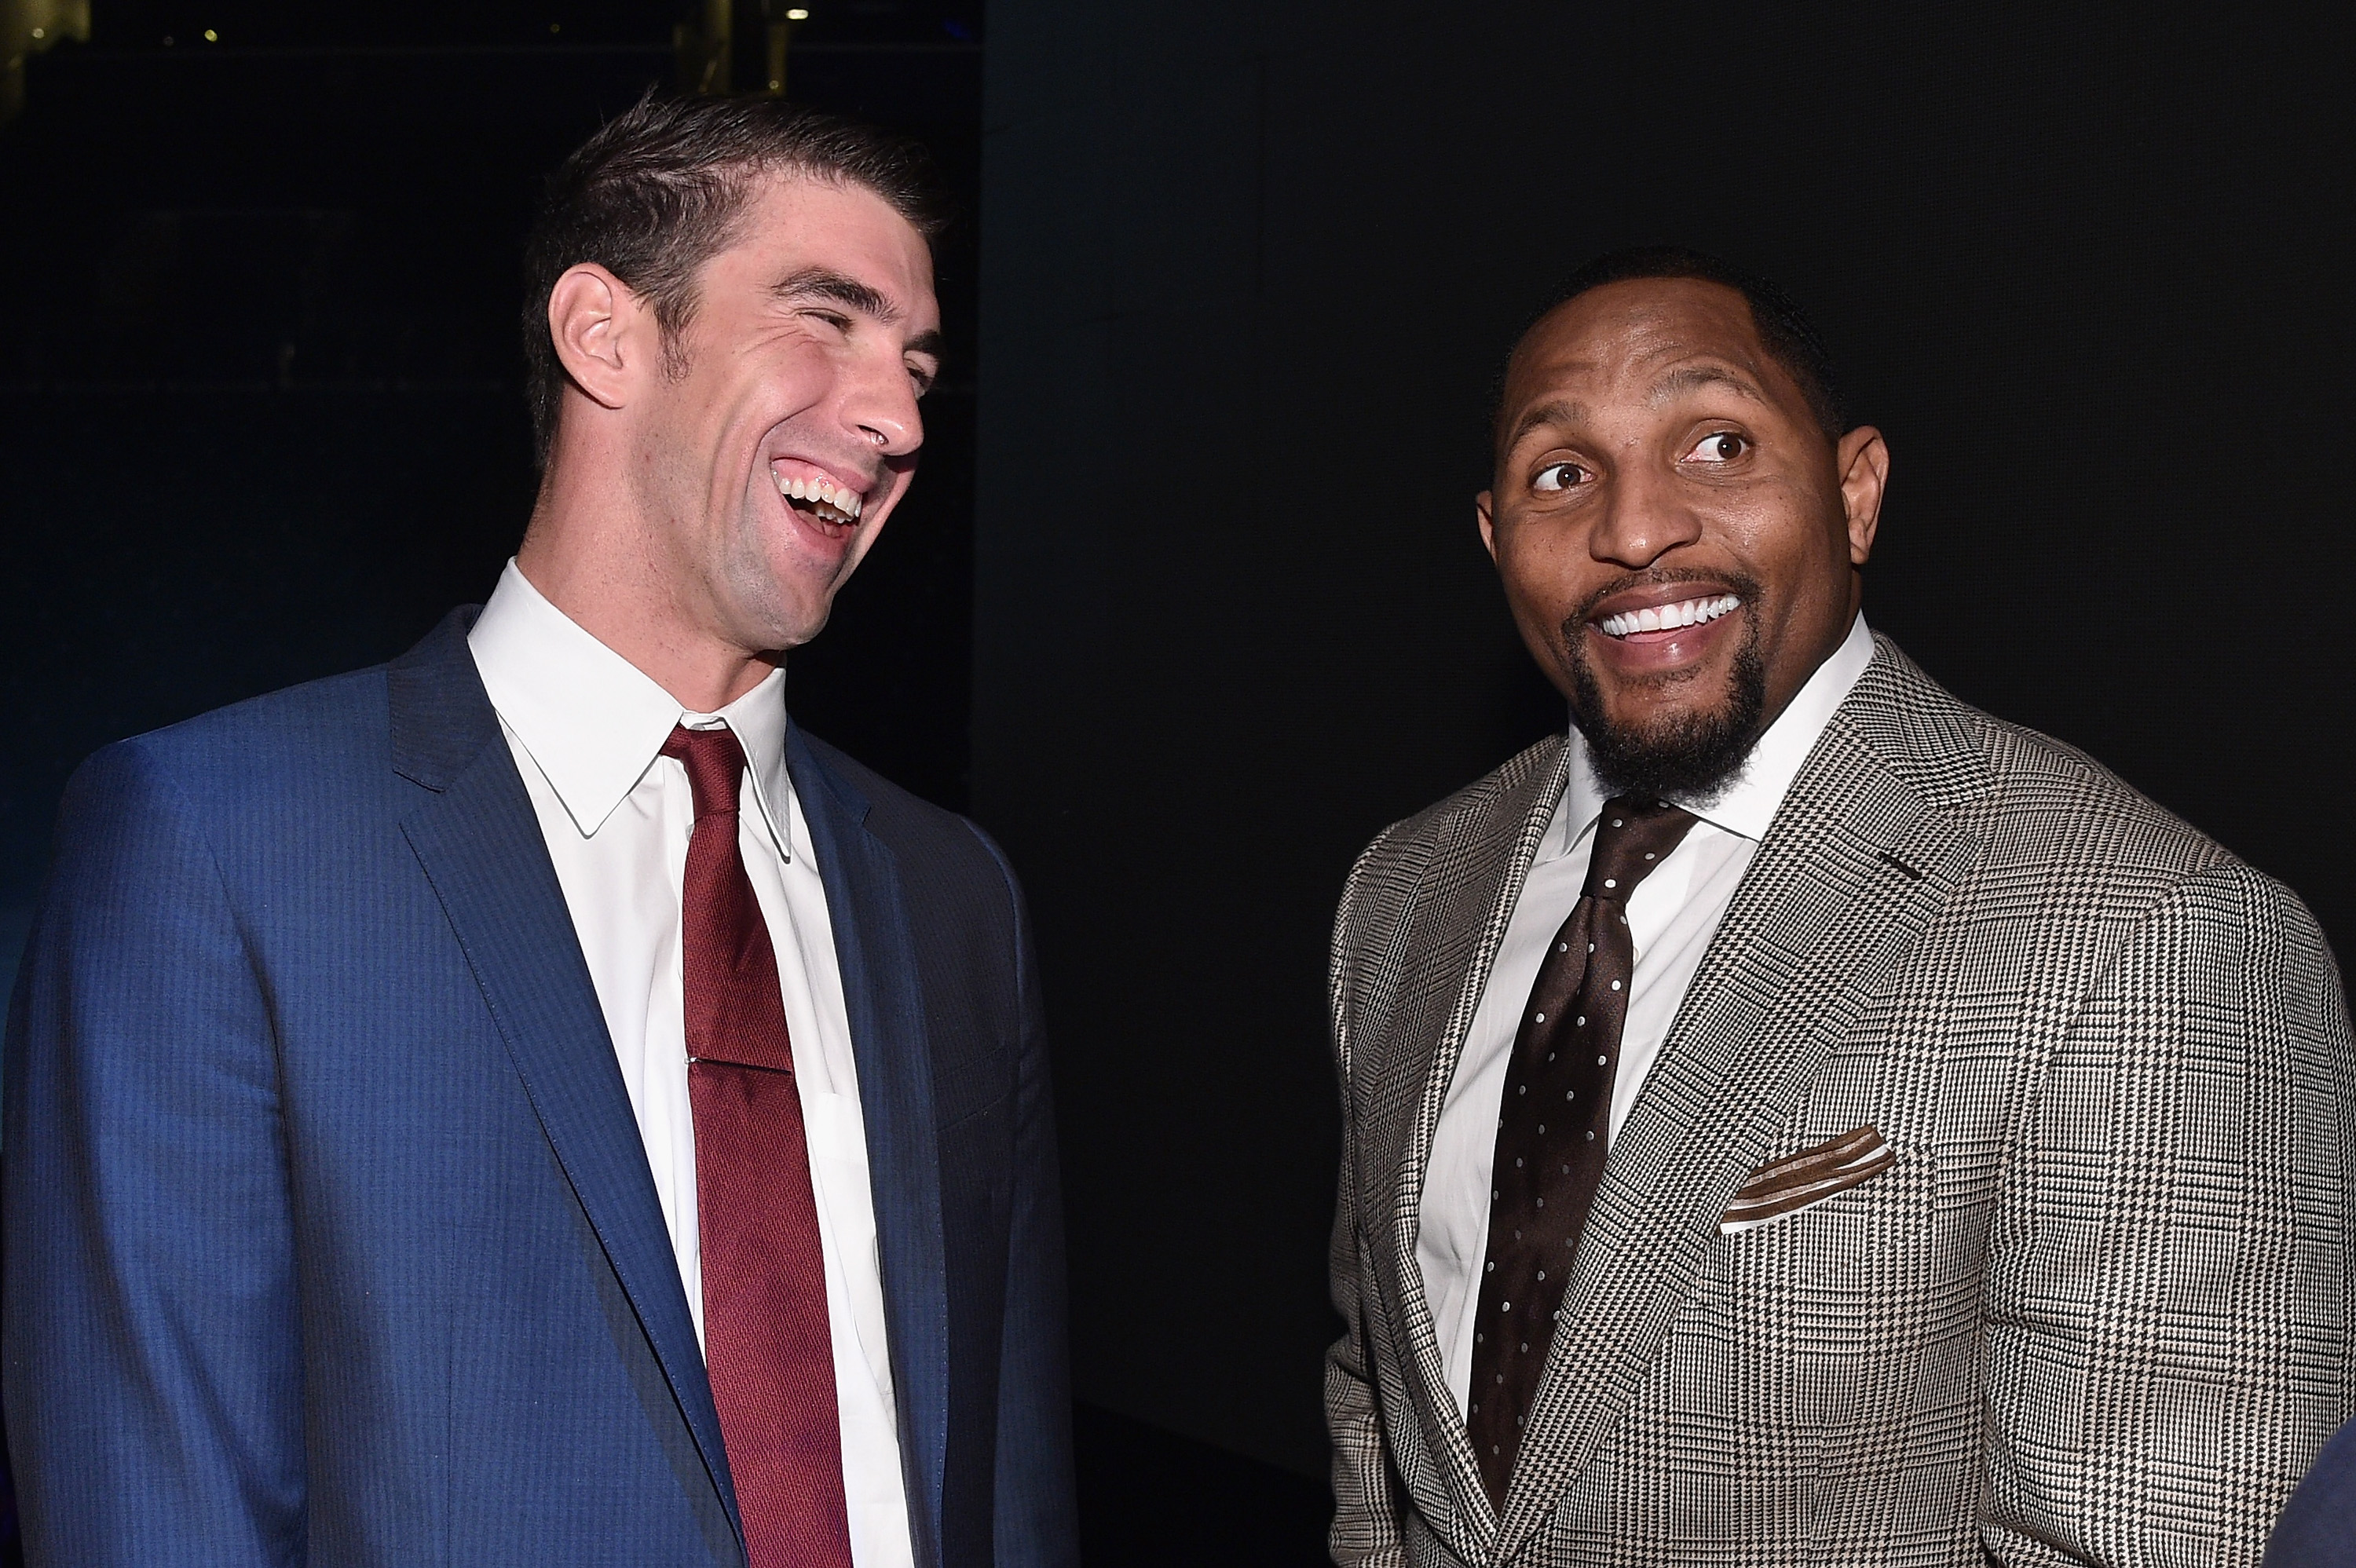 Michael Phelps and Ray Lewis Forged an Unlikely Friendship